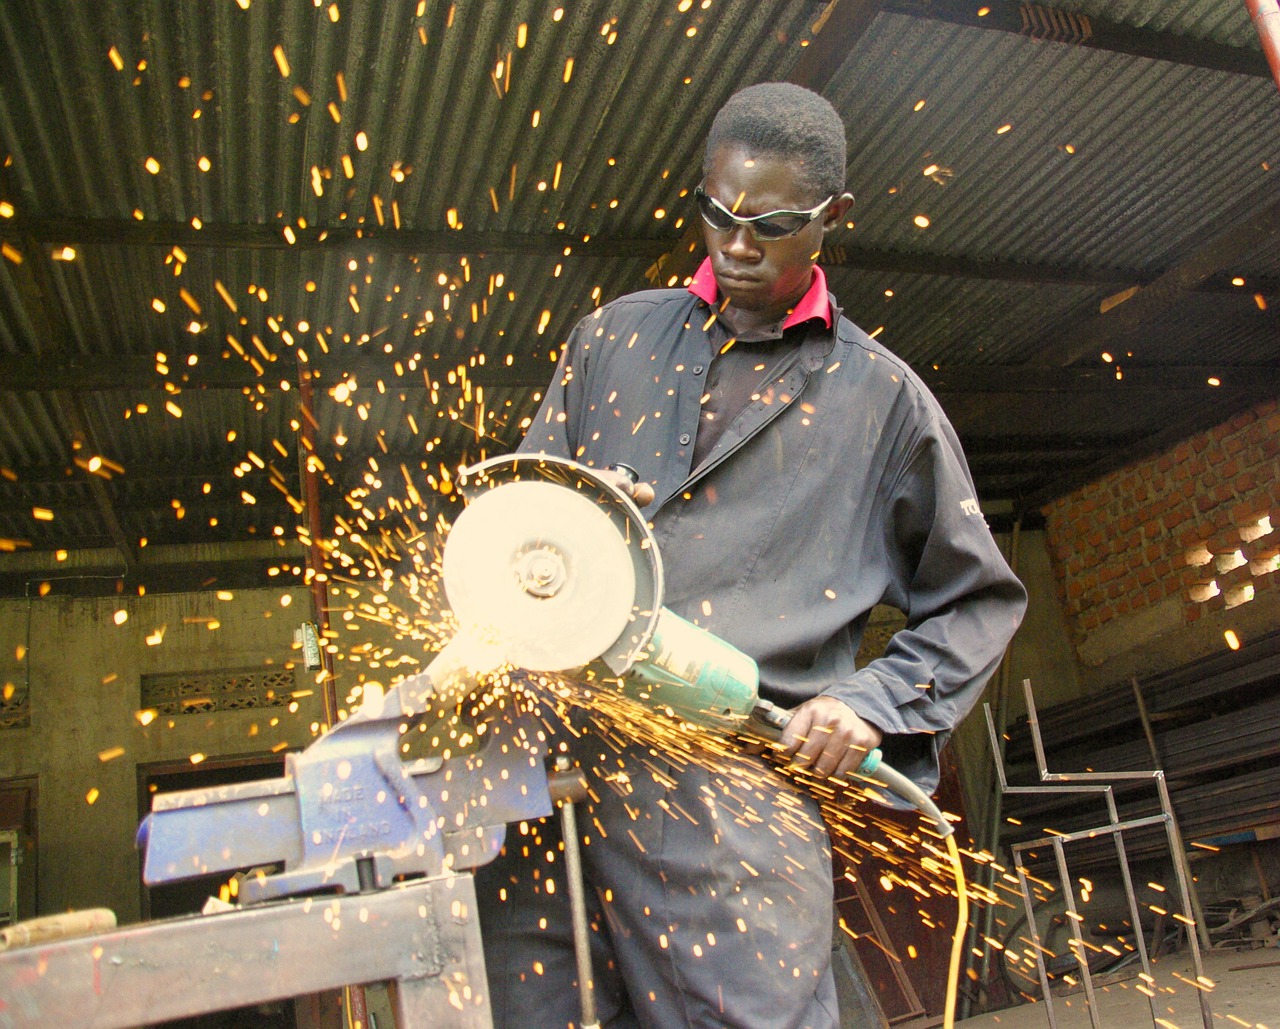 professional using an angle grinder